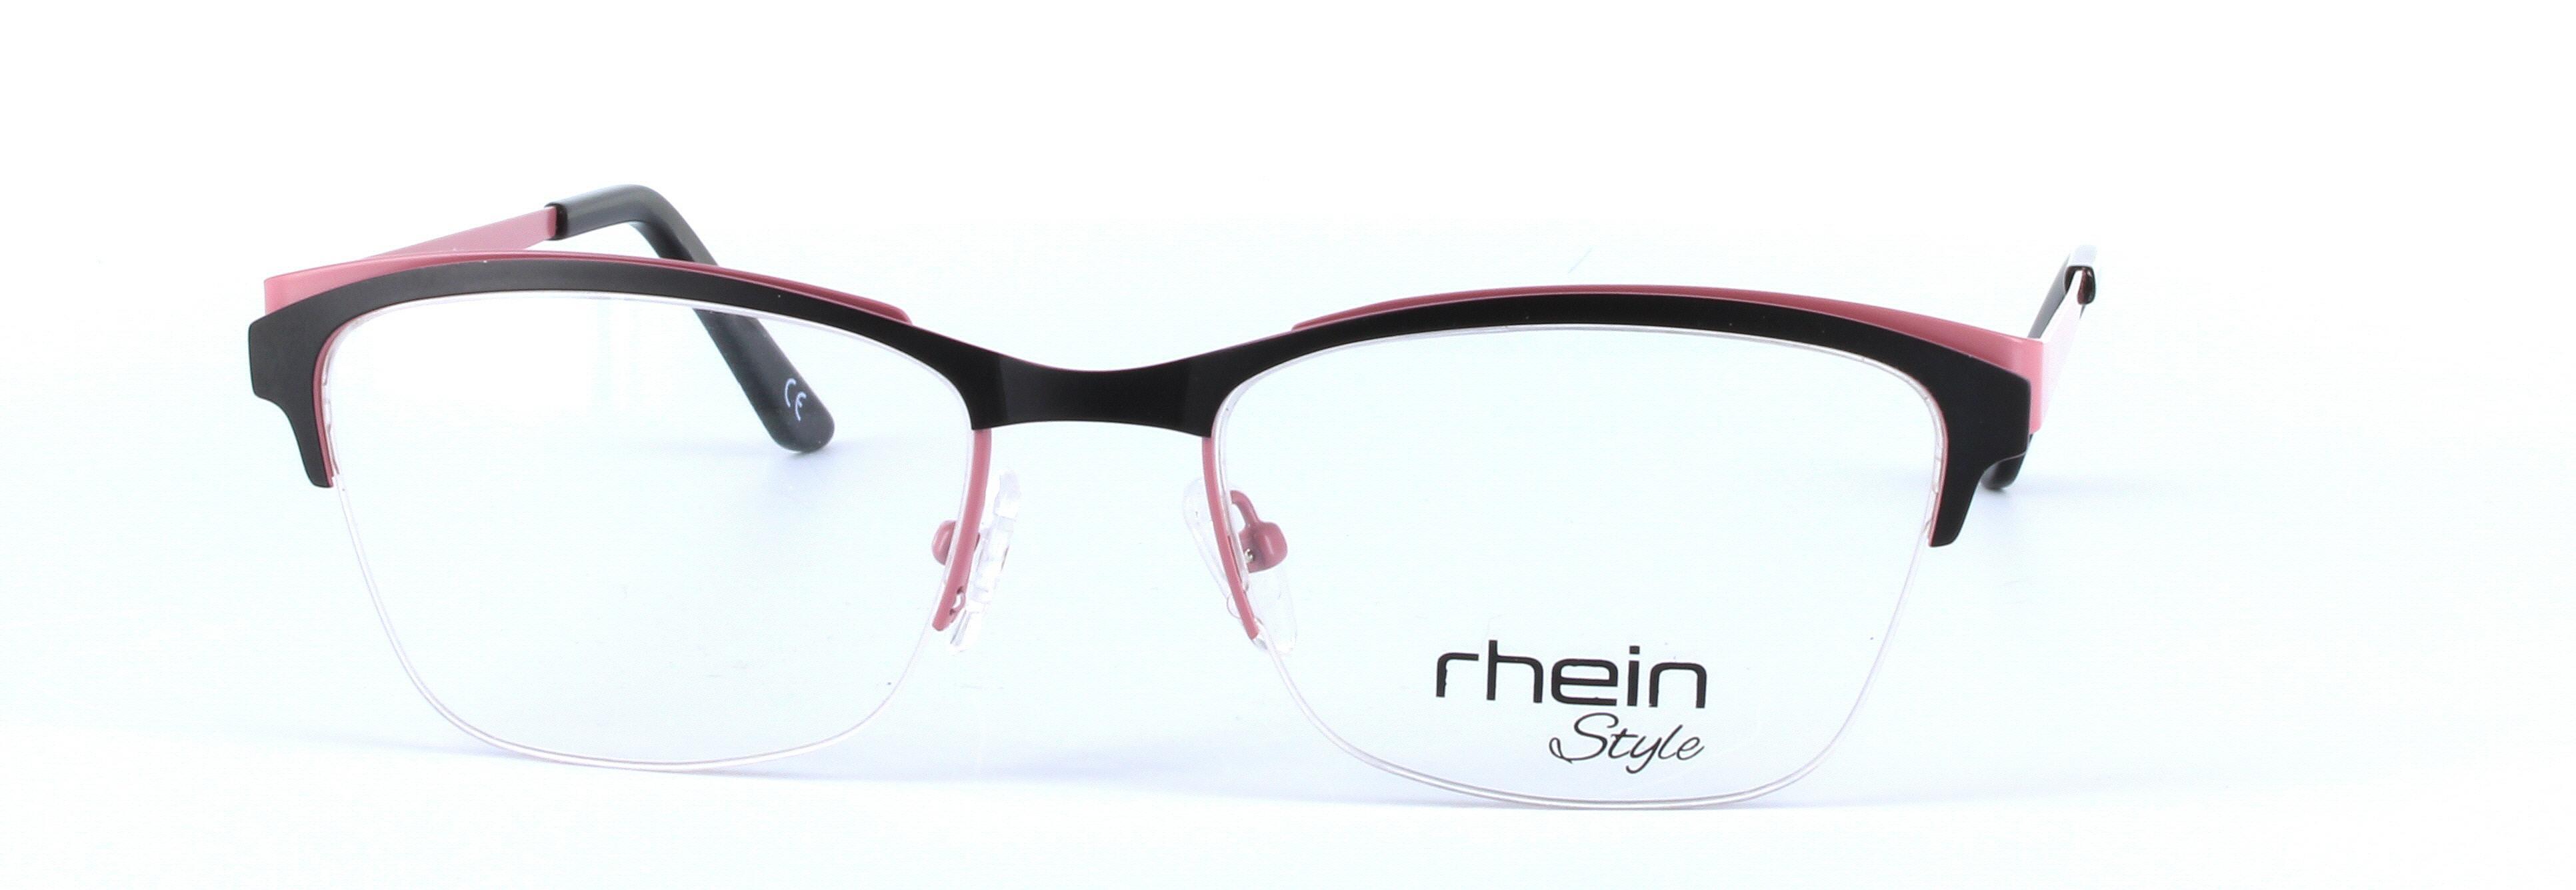 Andrea Black and Pink Semi Rimless Oval Metal Glasses - Image View 5